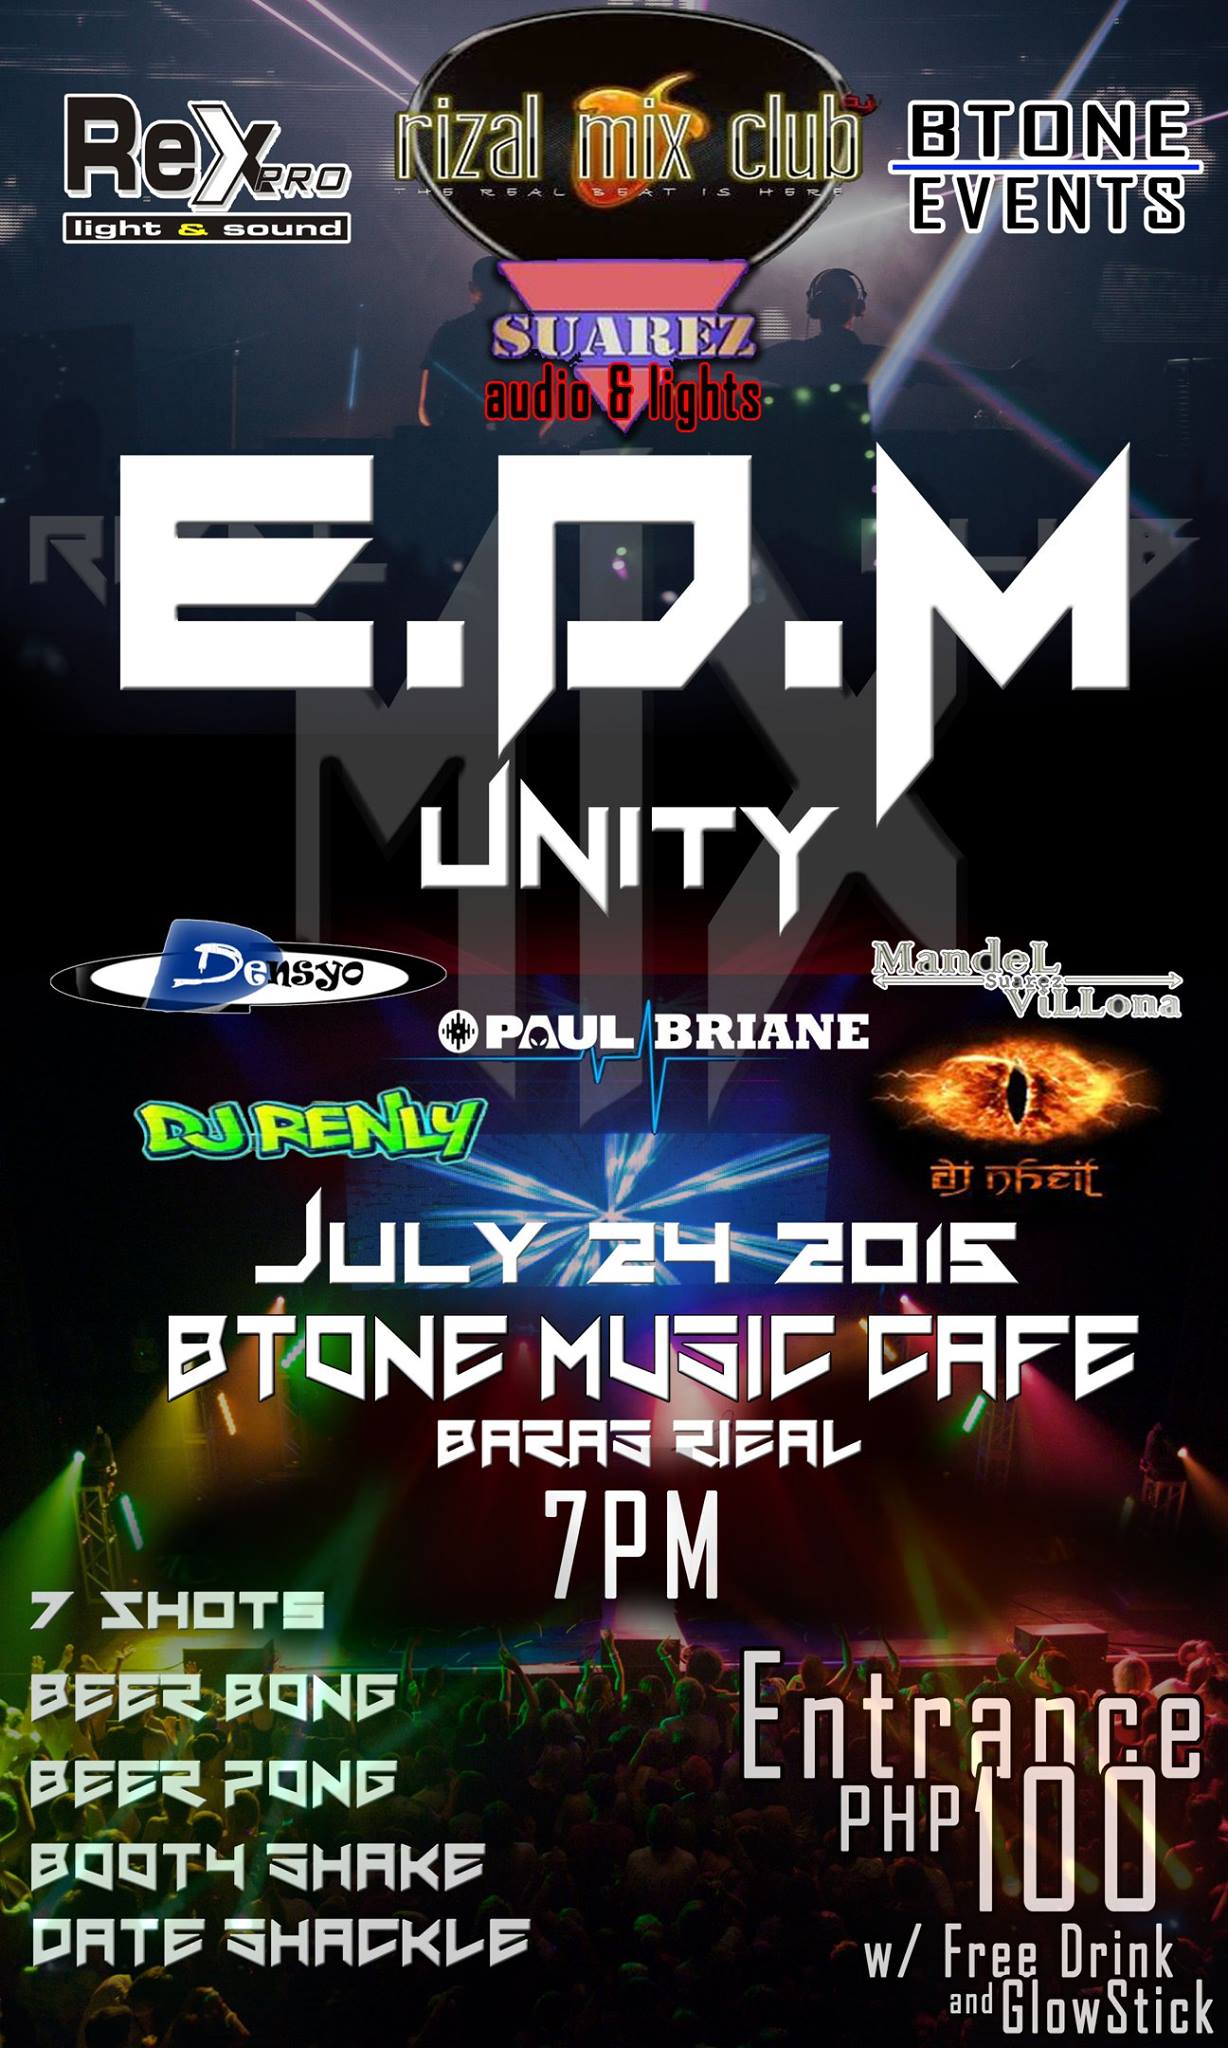 RMC - EDM Unity MUSIC FESTIVAL! Hosted by: Btone x Rex Pro x Suarez audio & light     Friday, July 24     at 7:00pm     Starts in about 13 hours · 77°F Mostly Cloudy     	     Show Map     Tanay Rizal Park     Tanay Rizal Park, Tanay, Rizal     	     Invited by Btone E Vents July 24, 2015 RIZAL MIX CLUB "EDM Unity" the very first Electronic Dance Music Festival in tanay Rizal! Featuring our Rizal Finest DJs: Paul Briane Ruloma, Mandel Suarez Villona, Renly Mascarinas Monta, DeejayNheil Remix, Dennis Densyo & Many More! Games: 7 Shots, Beer Bong, Beer Pong, Booty Shake, Date Shackle. Venue: At Tanay Park Authority 7pm onwards Tanay, RIzal Tickets are now Available for only 100pesos what are you waiting for? Buy NOW! pls call at 09277350073 09354914844/ 09468667185 Events Powered by: Suarez Audio Visual X Rex Pro X Btone Party till the Host is on! Live for today, Dream for Tommorow!